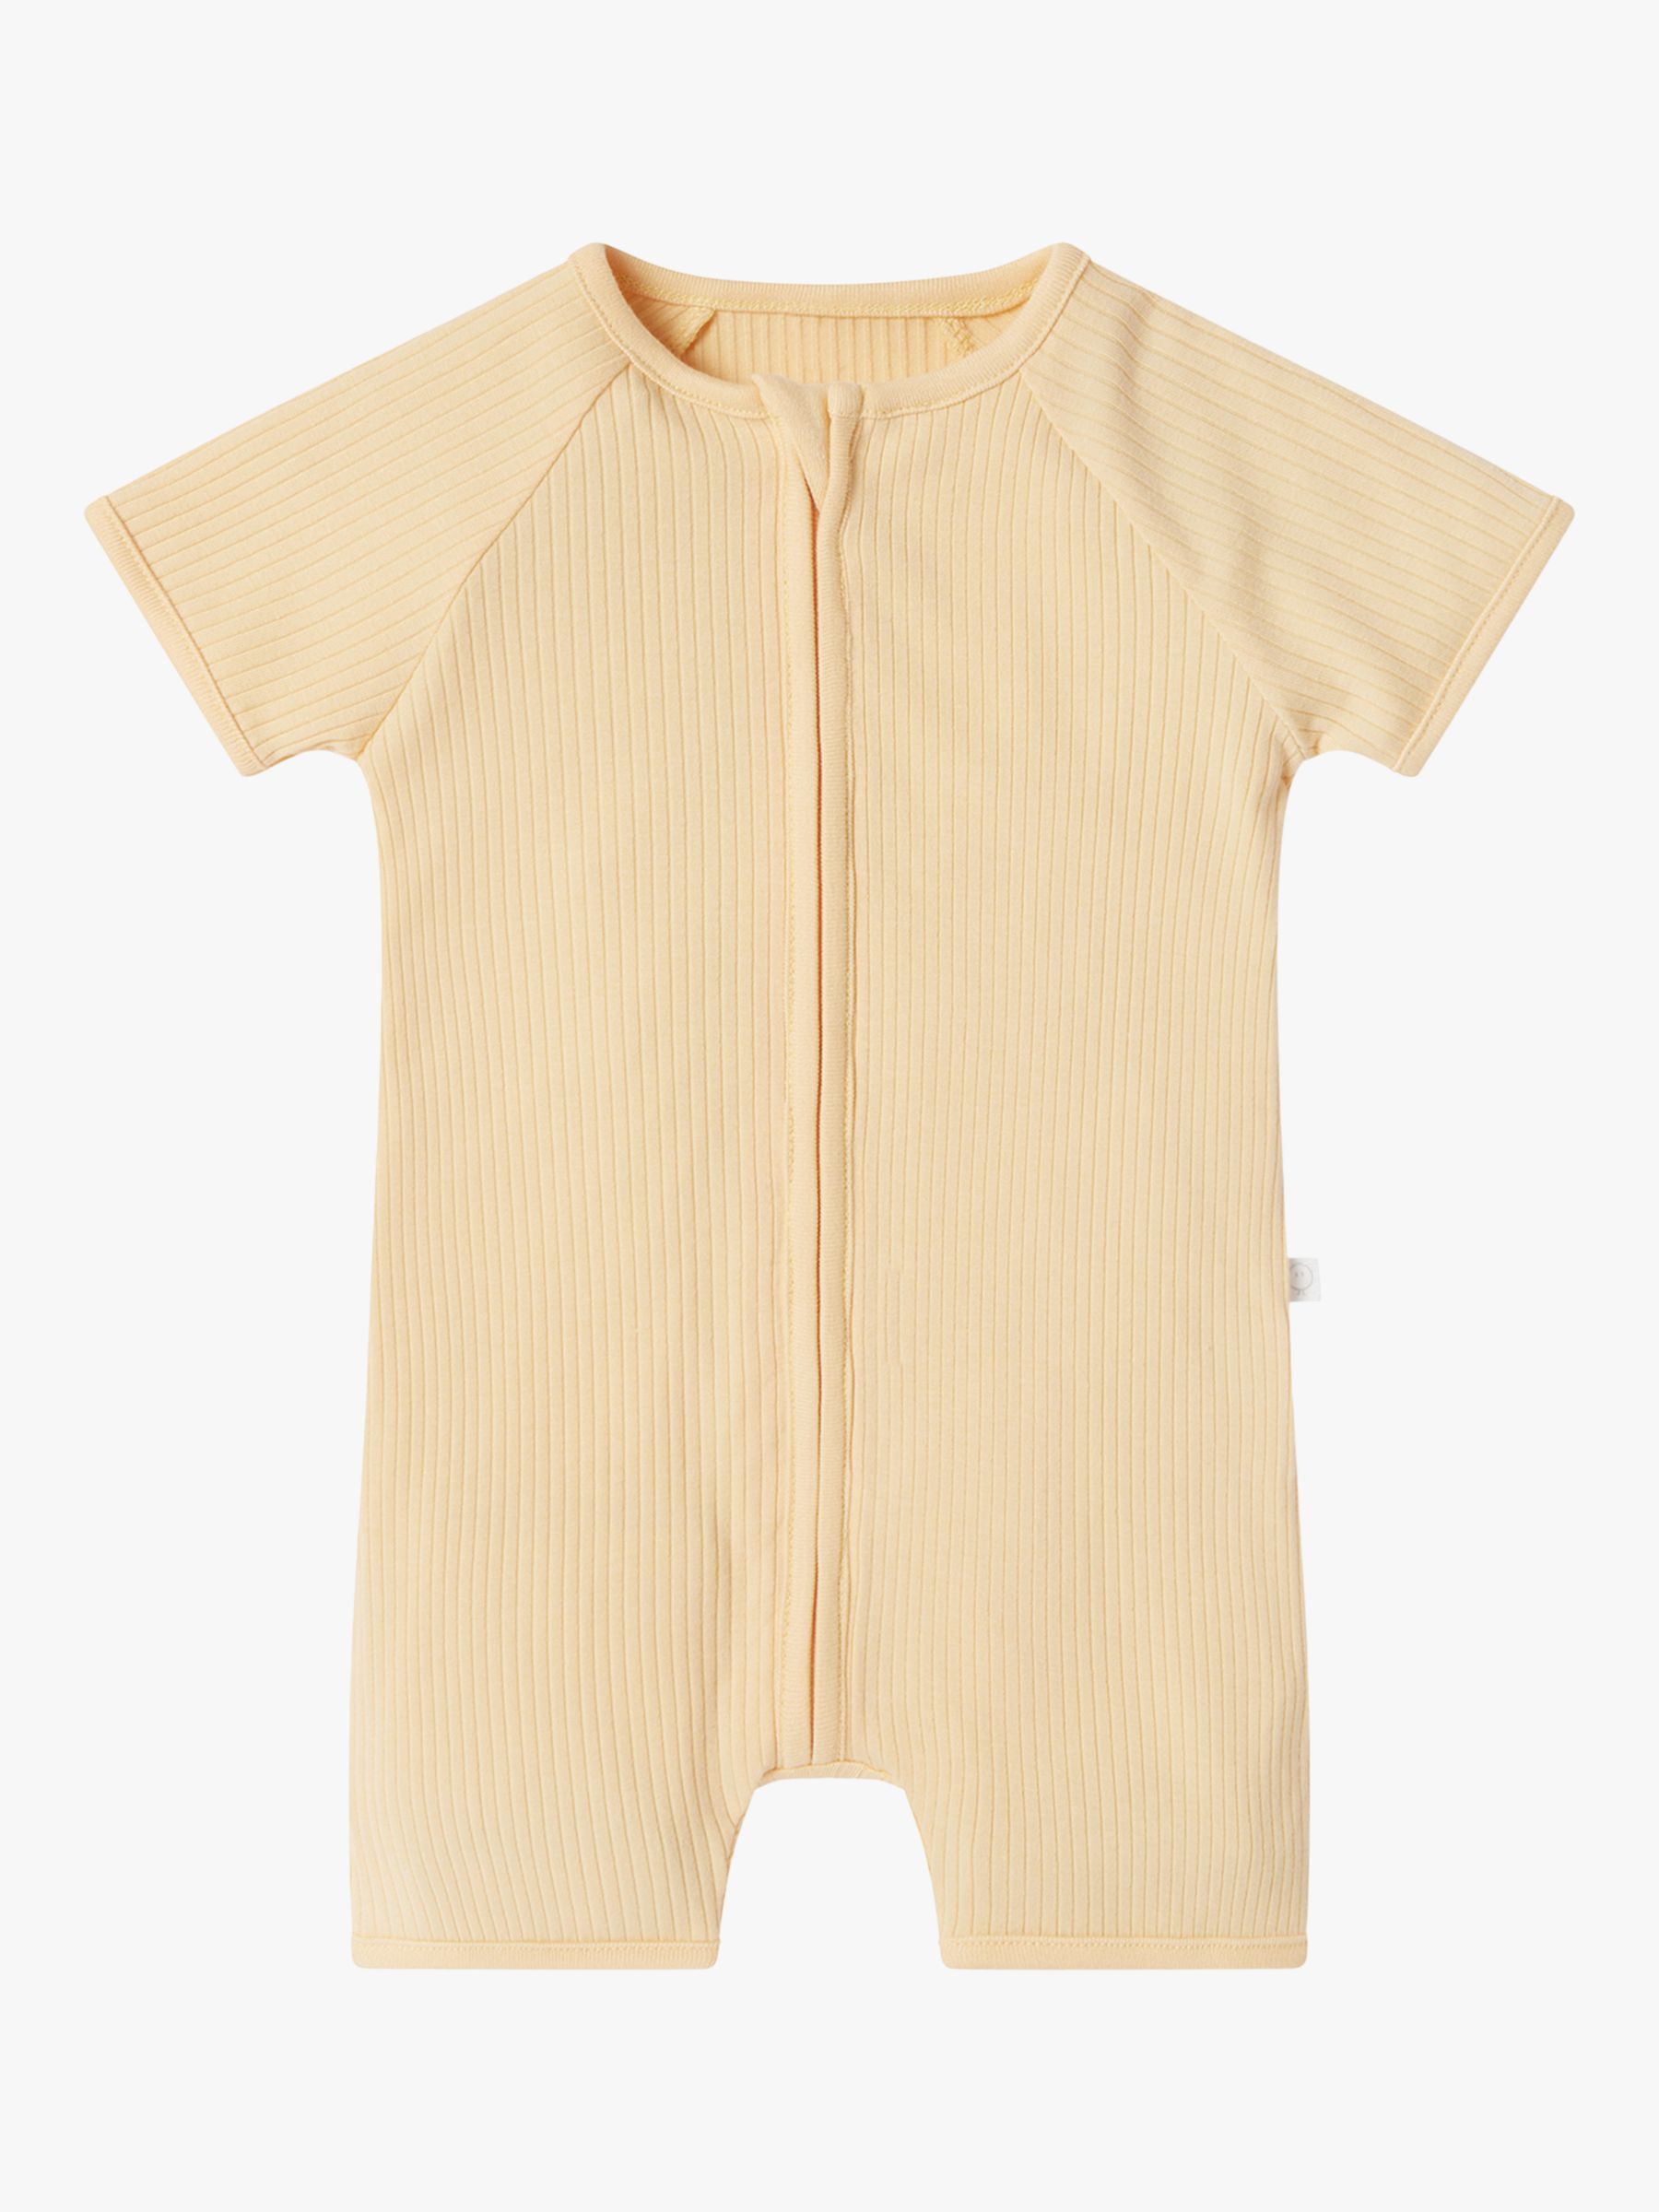 MORI Baby Clever Zip Ribbed Summer Sleepsuit, Yellow, 3-6 months